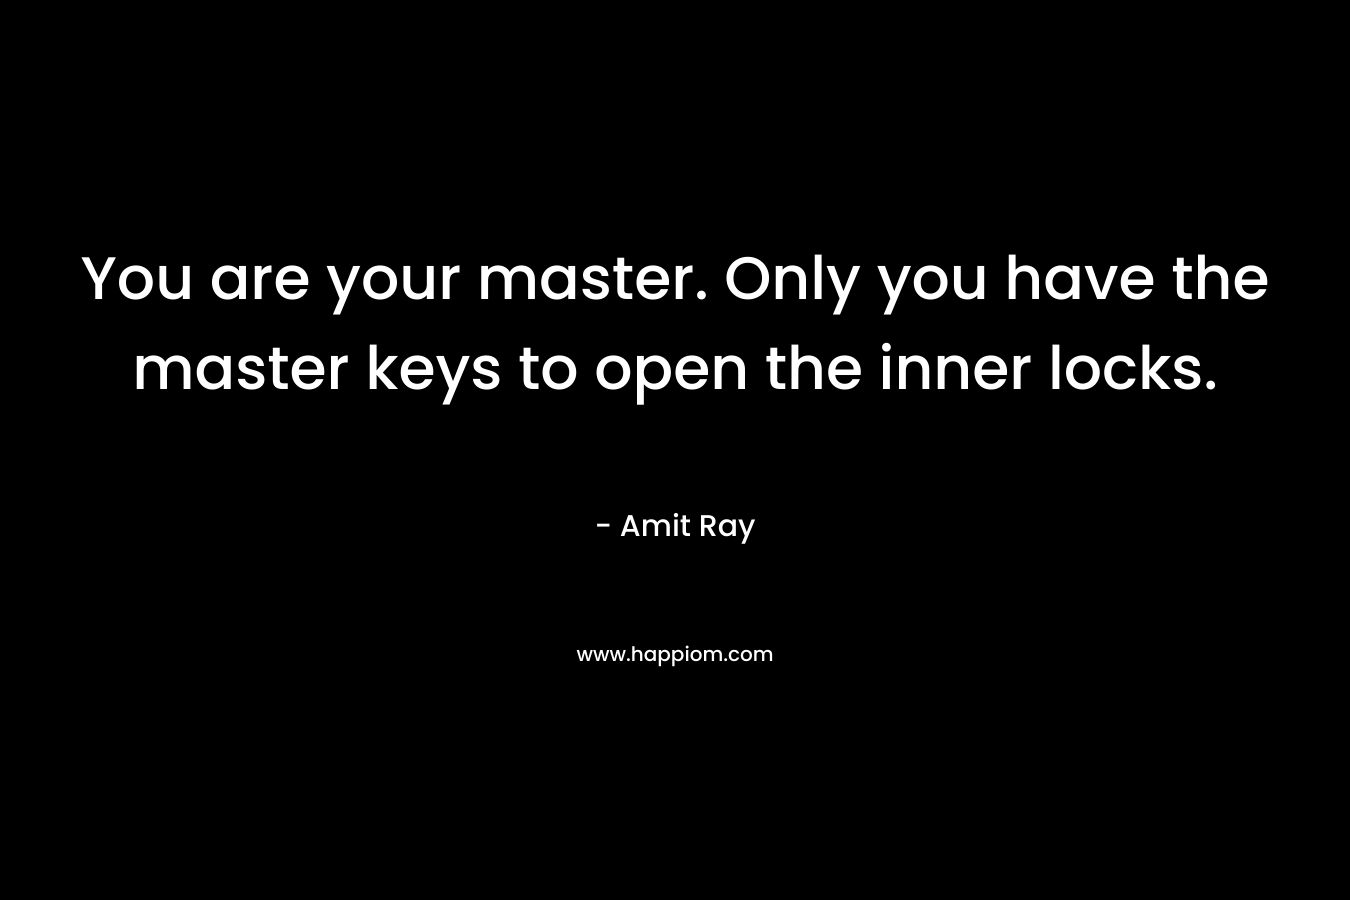 You are your master. Only you have the master keys to open the inner locks. – Amit Ray